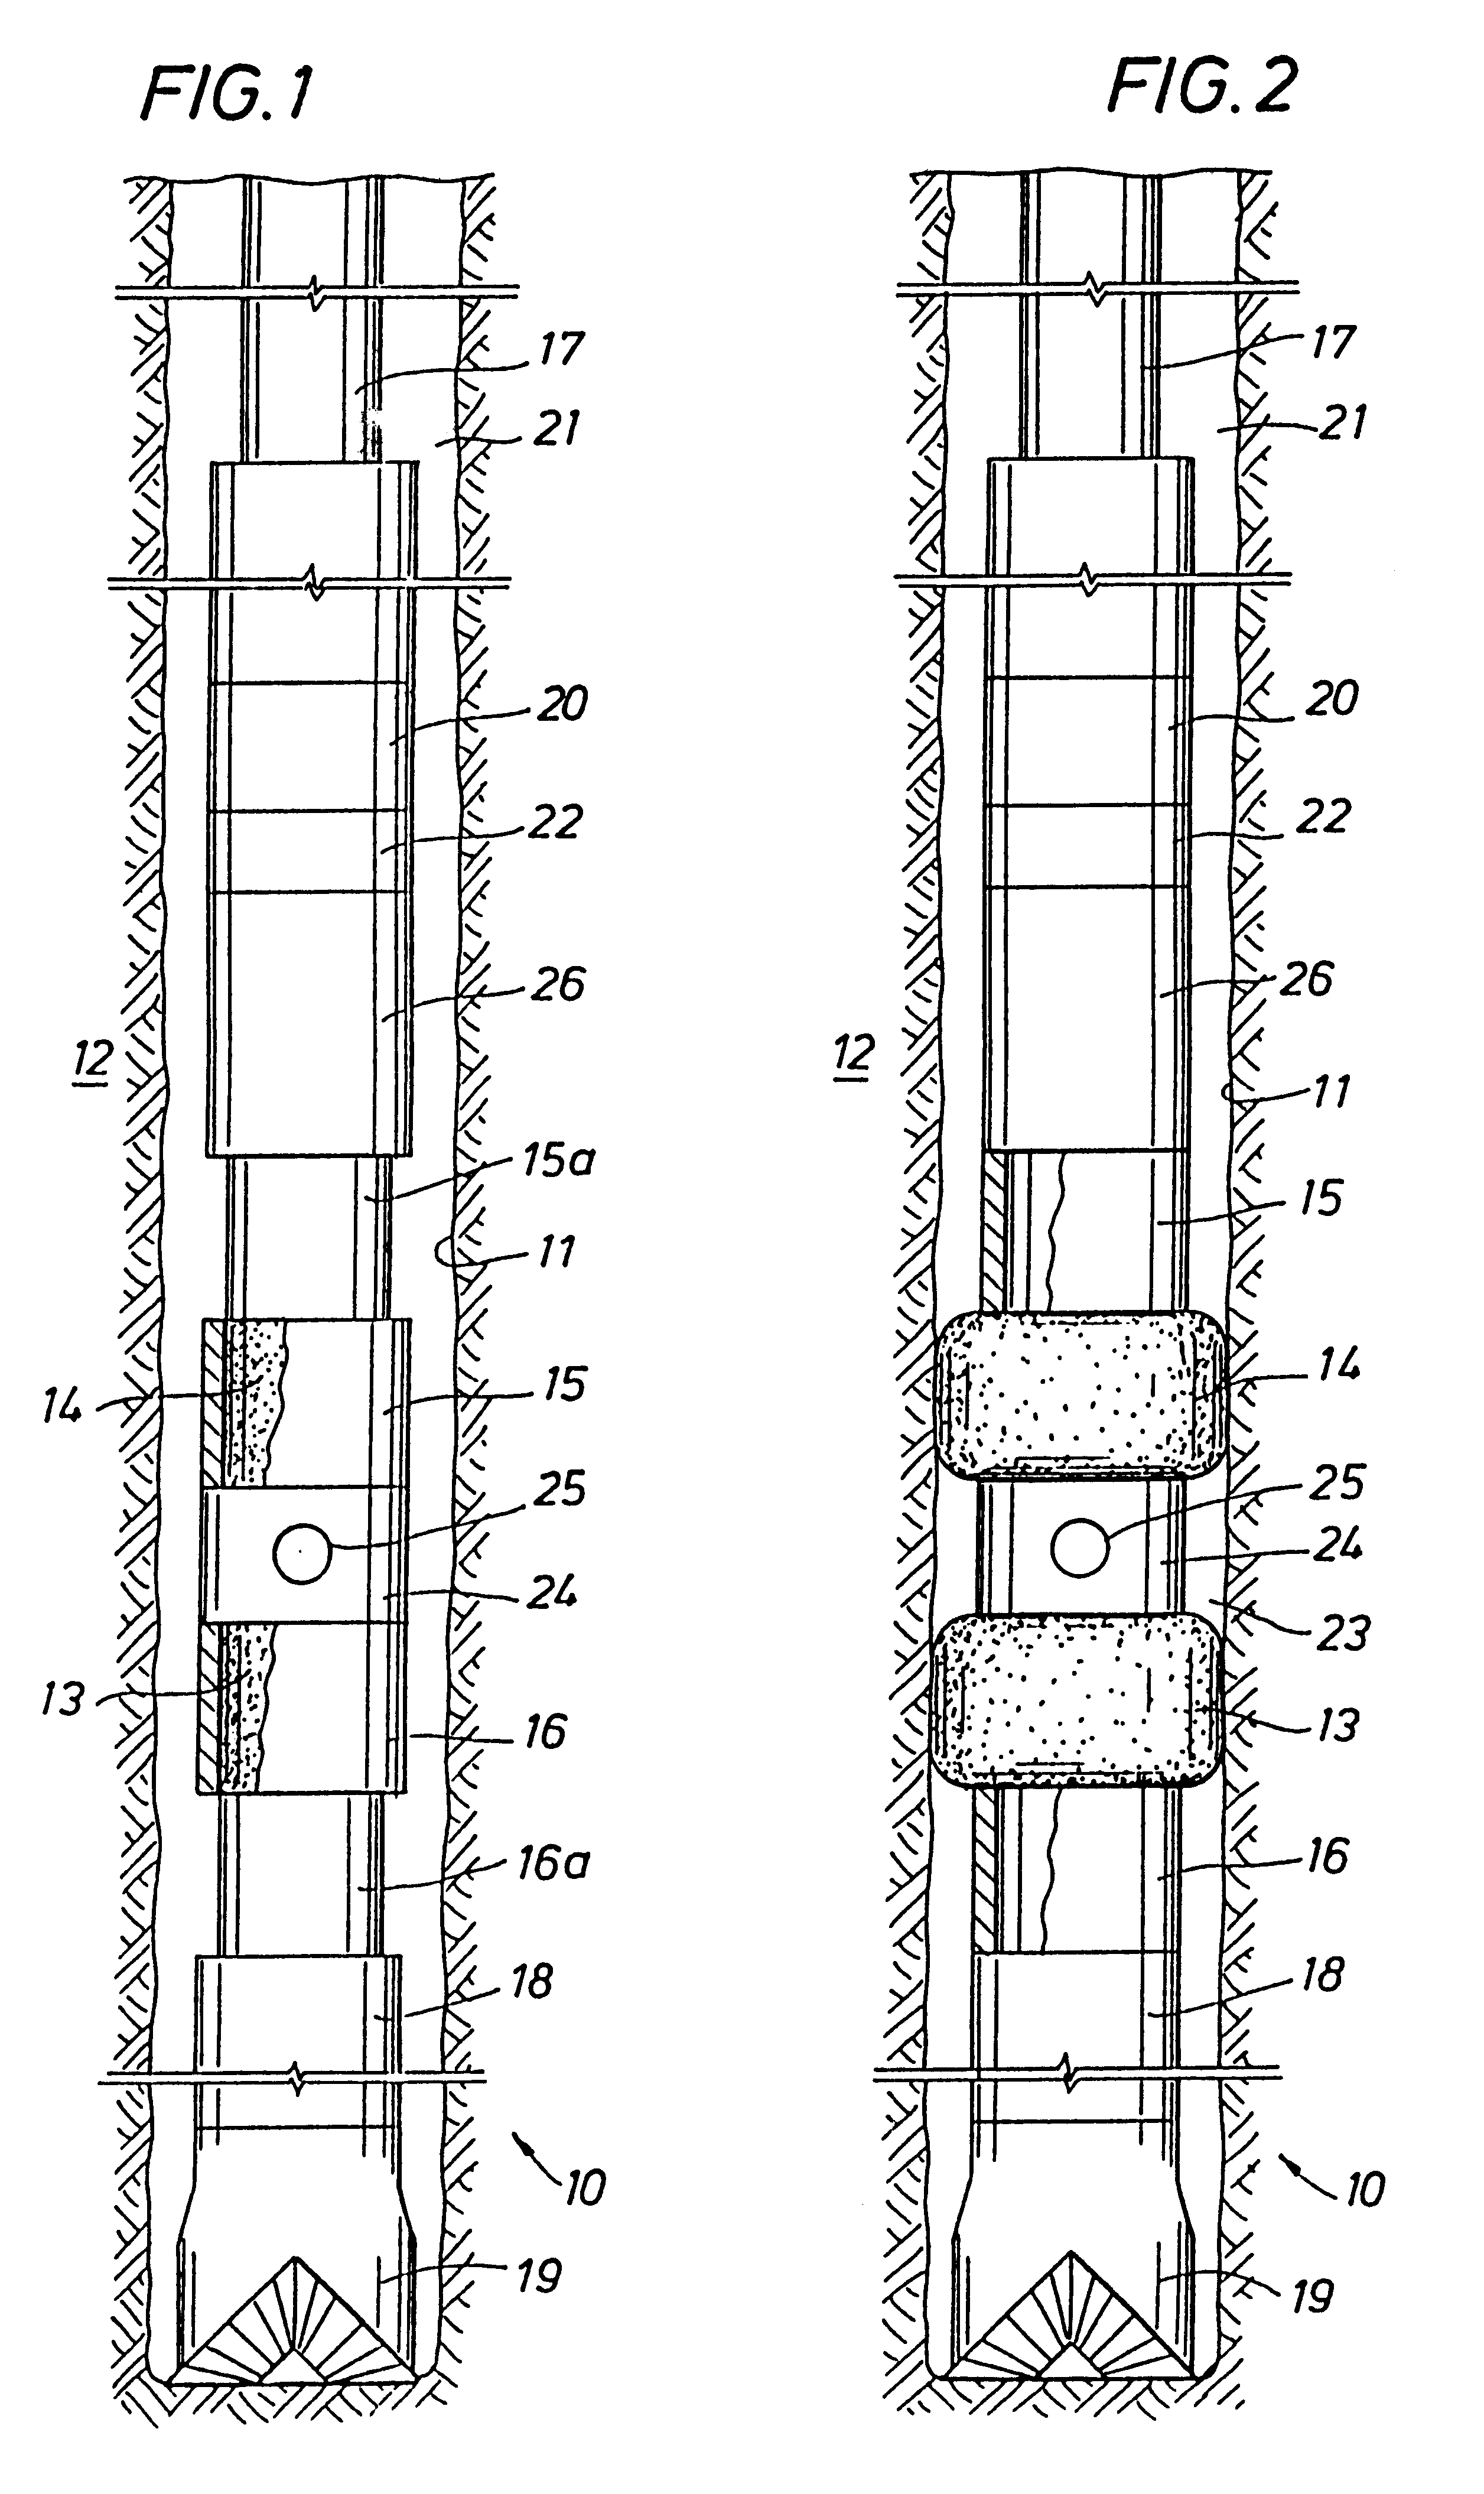 Subsurface measurement apparatus, system, and process for improved well drilling, control, and production